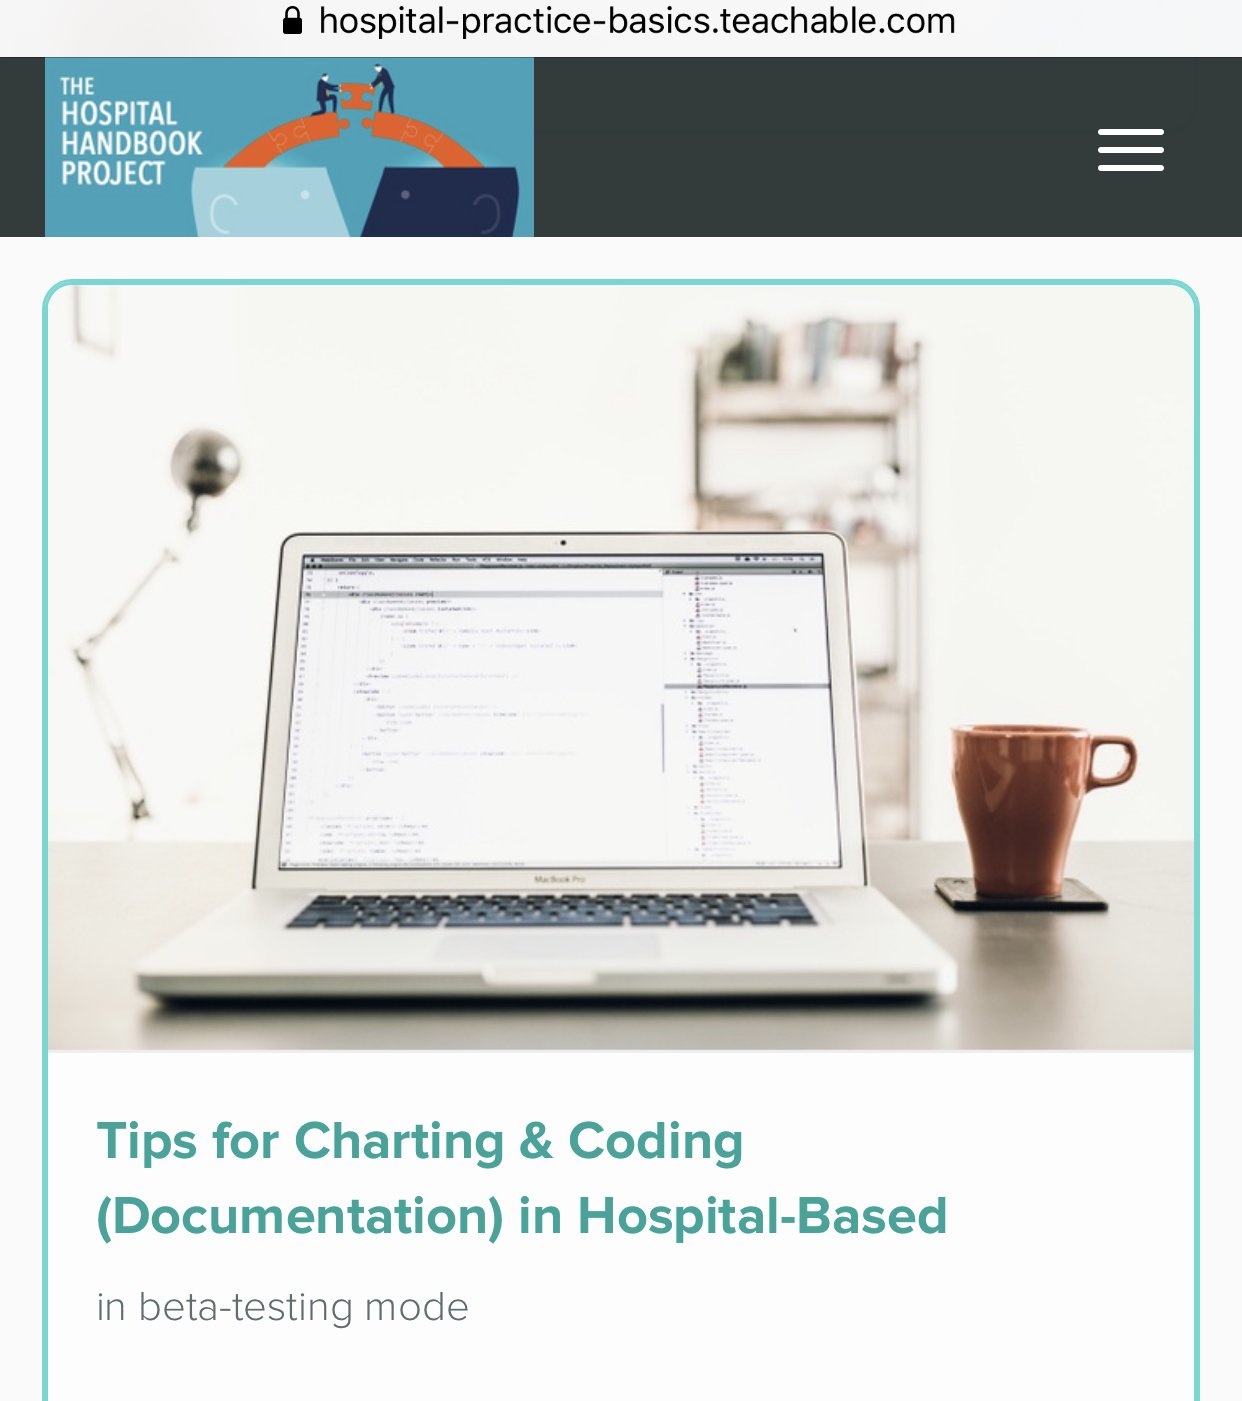 tips for charting_coding_the teachable course image.jpg